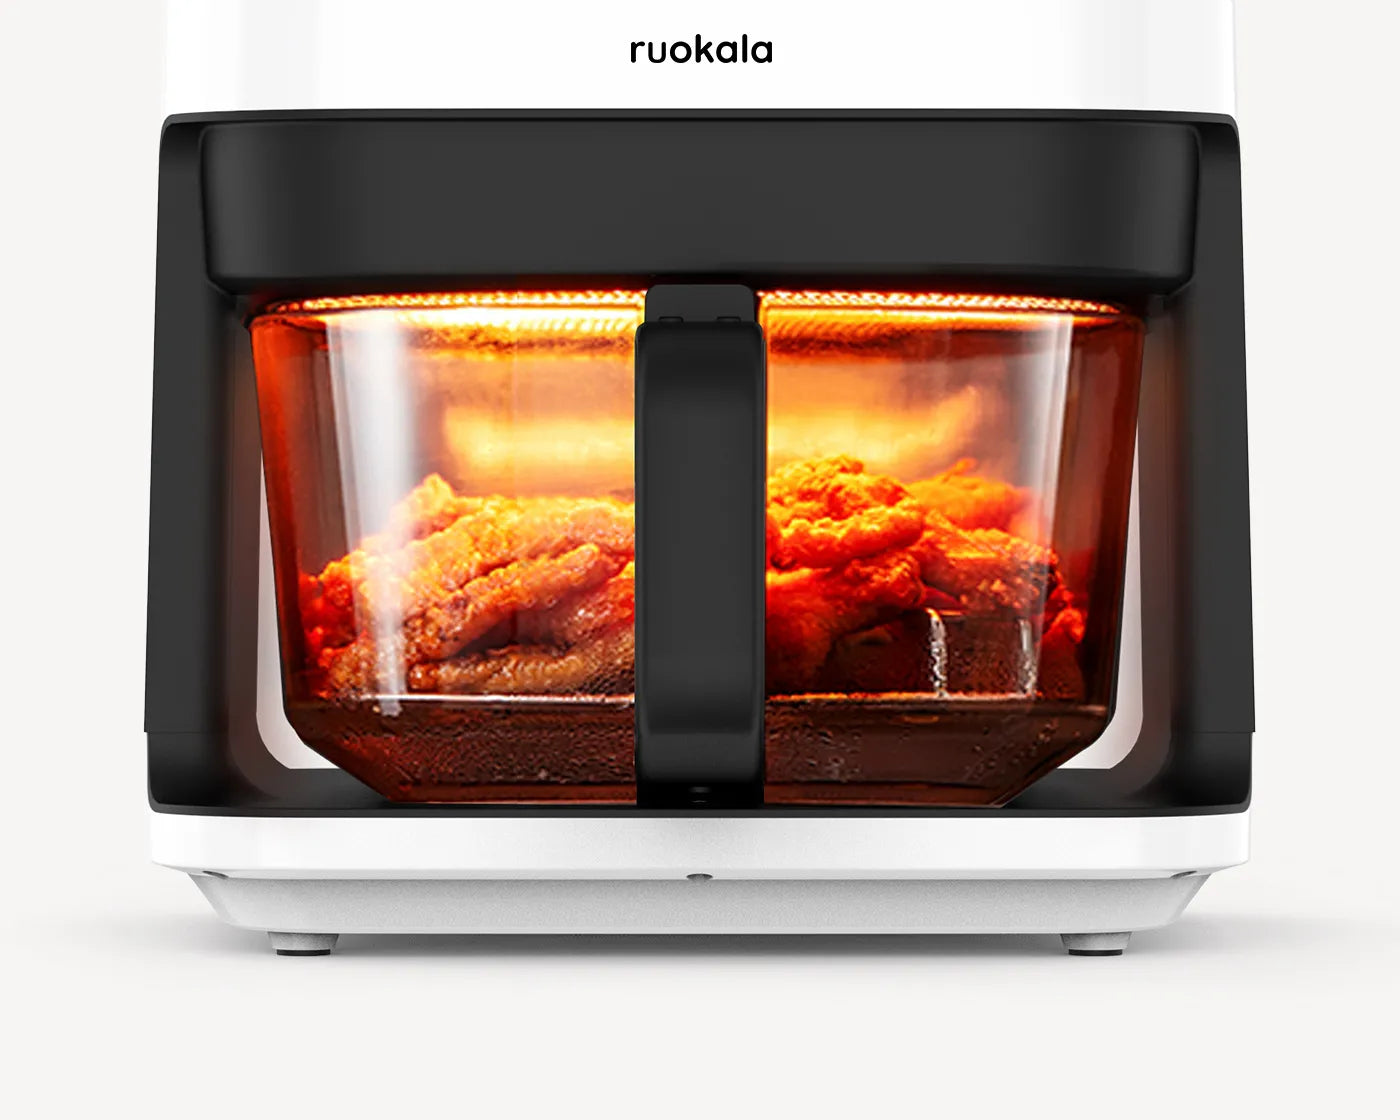 Sizzling chicken wings being cooked to perfection in a Ruokala air fryer, exemplifying convenient and healthy cooking.